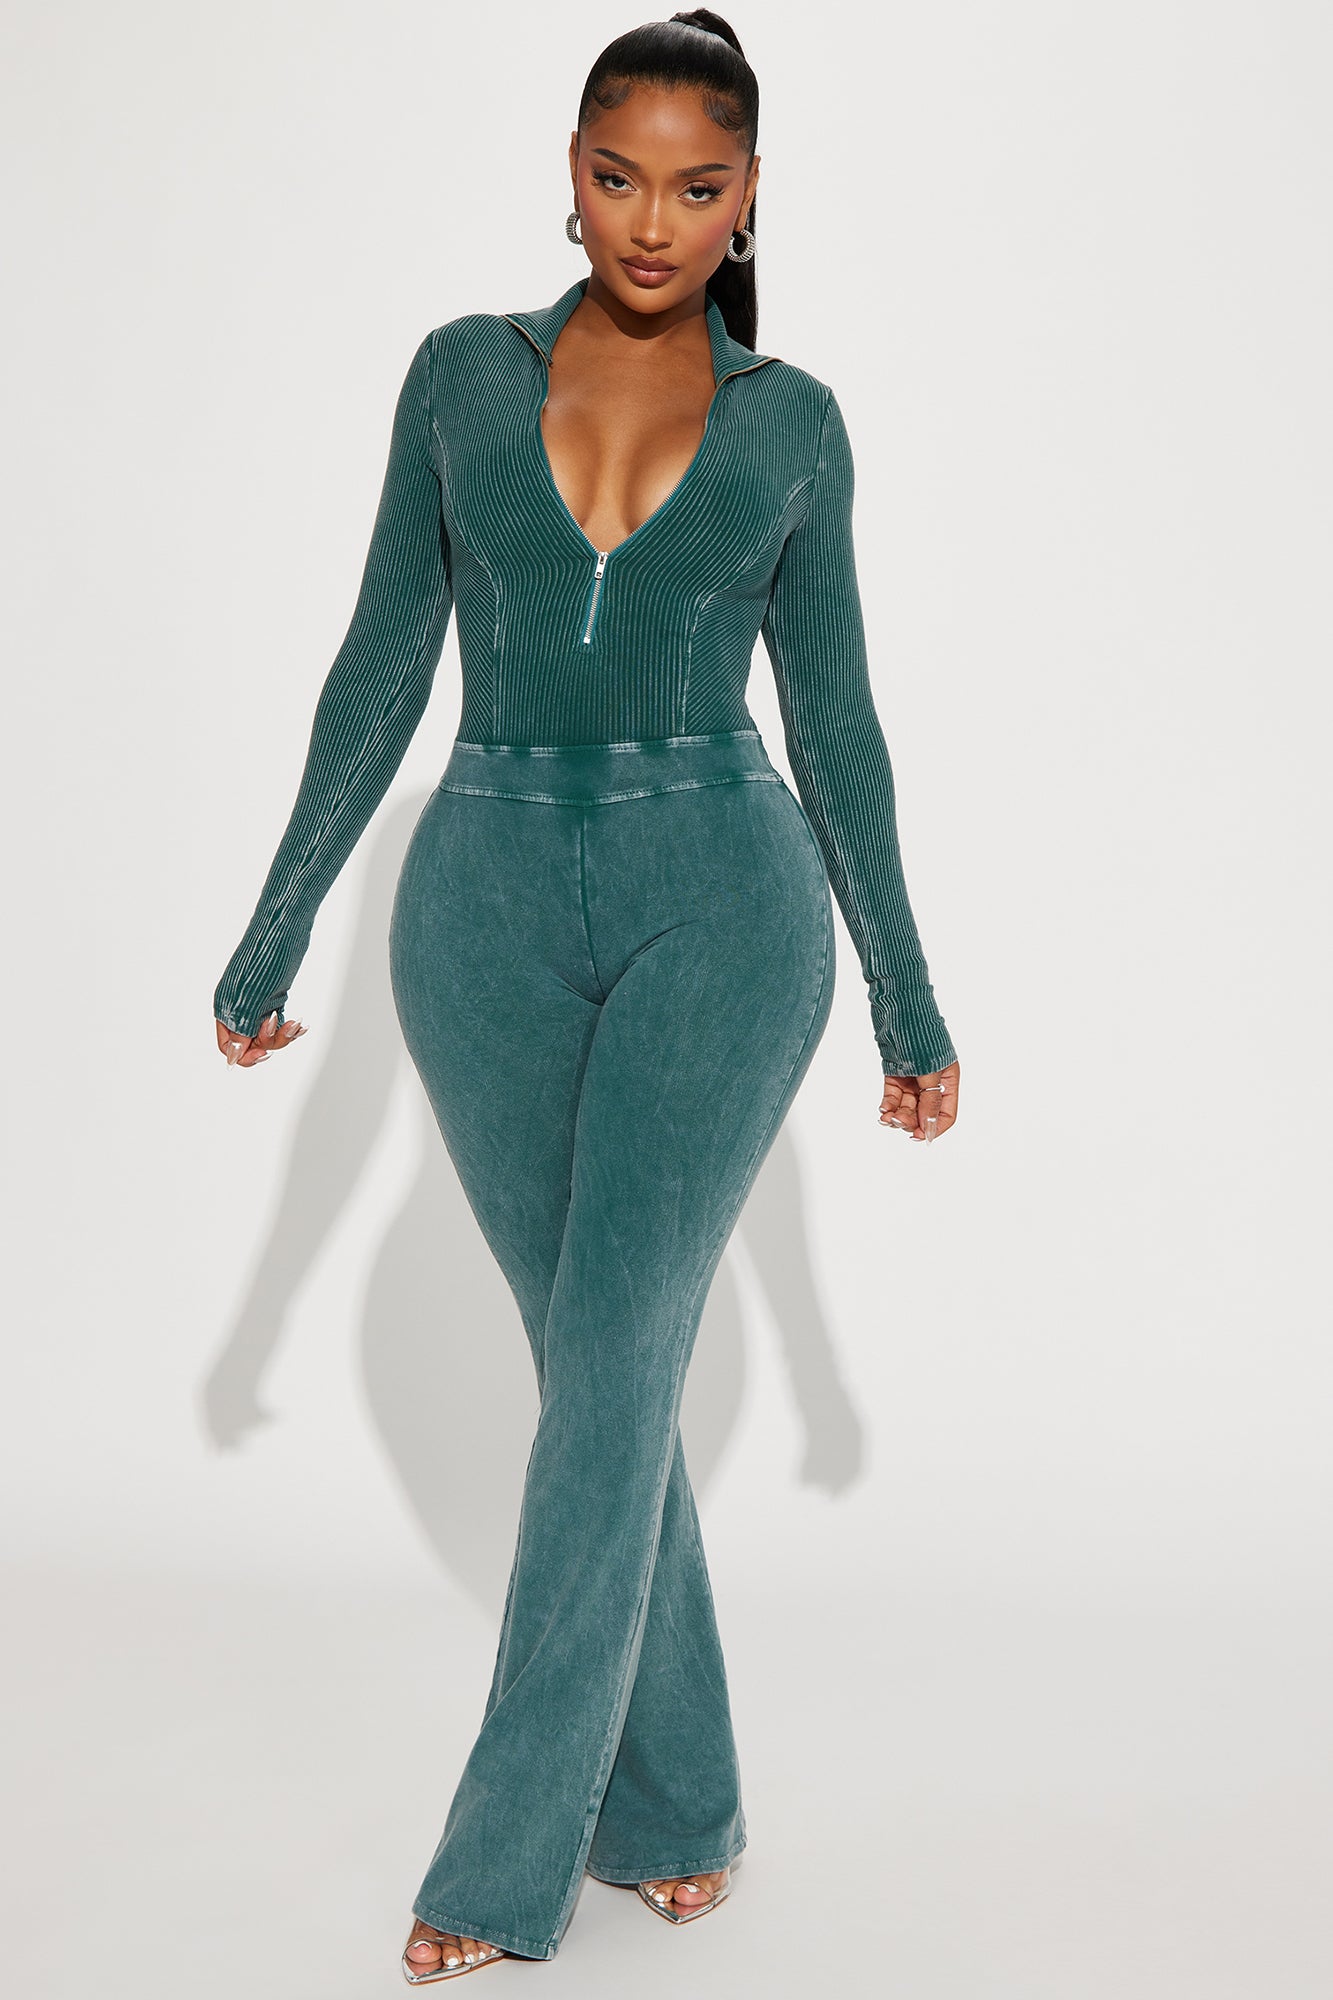 NovaMEN by @FashionNova @FashionNovaCurve ✨In my moment✨ Search 🔍 •All  That Sparkles Jumpsuit - Hunter Size: 1X -Fit very go